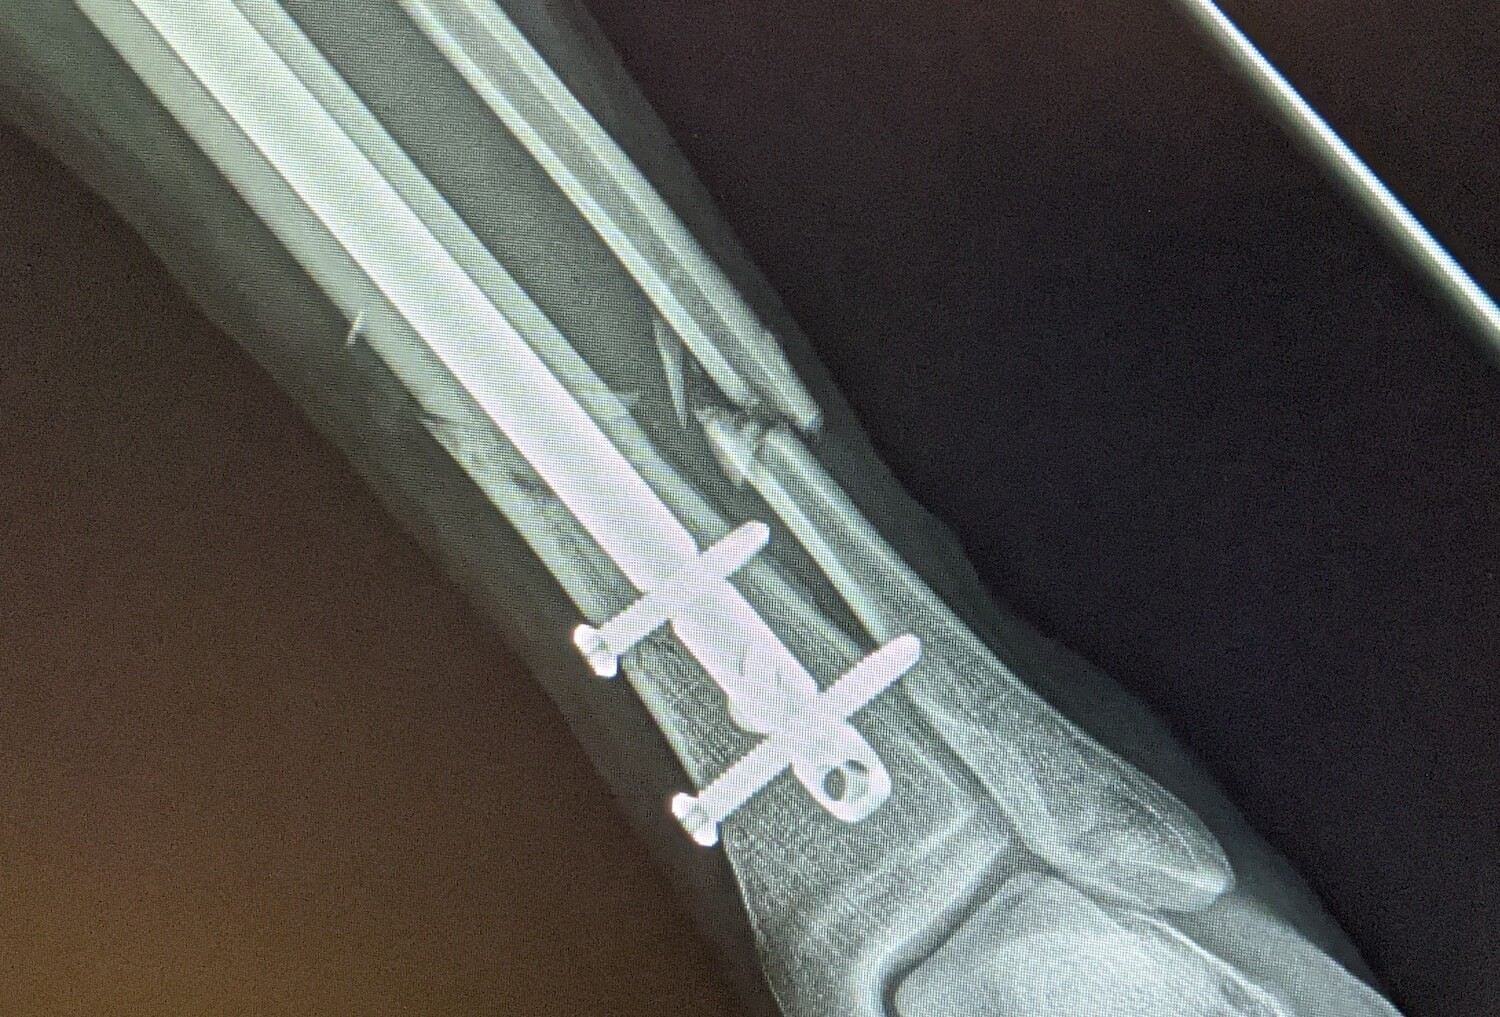 X-ray of an intramedullary nail in left tibia with a fractured fibula